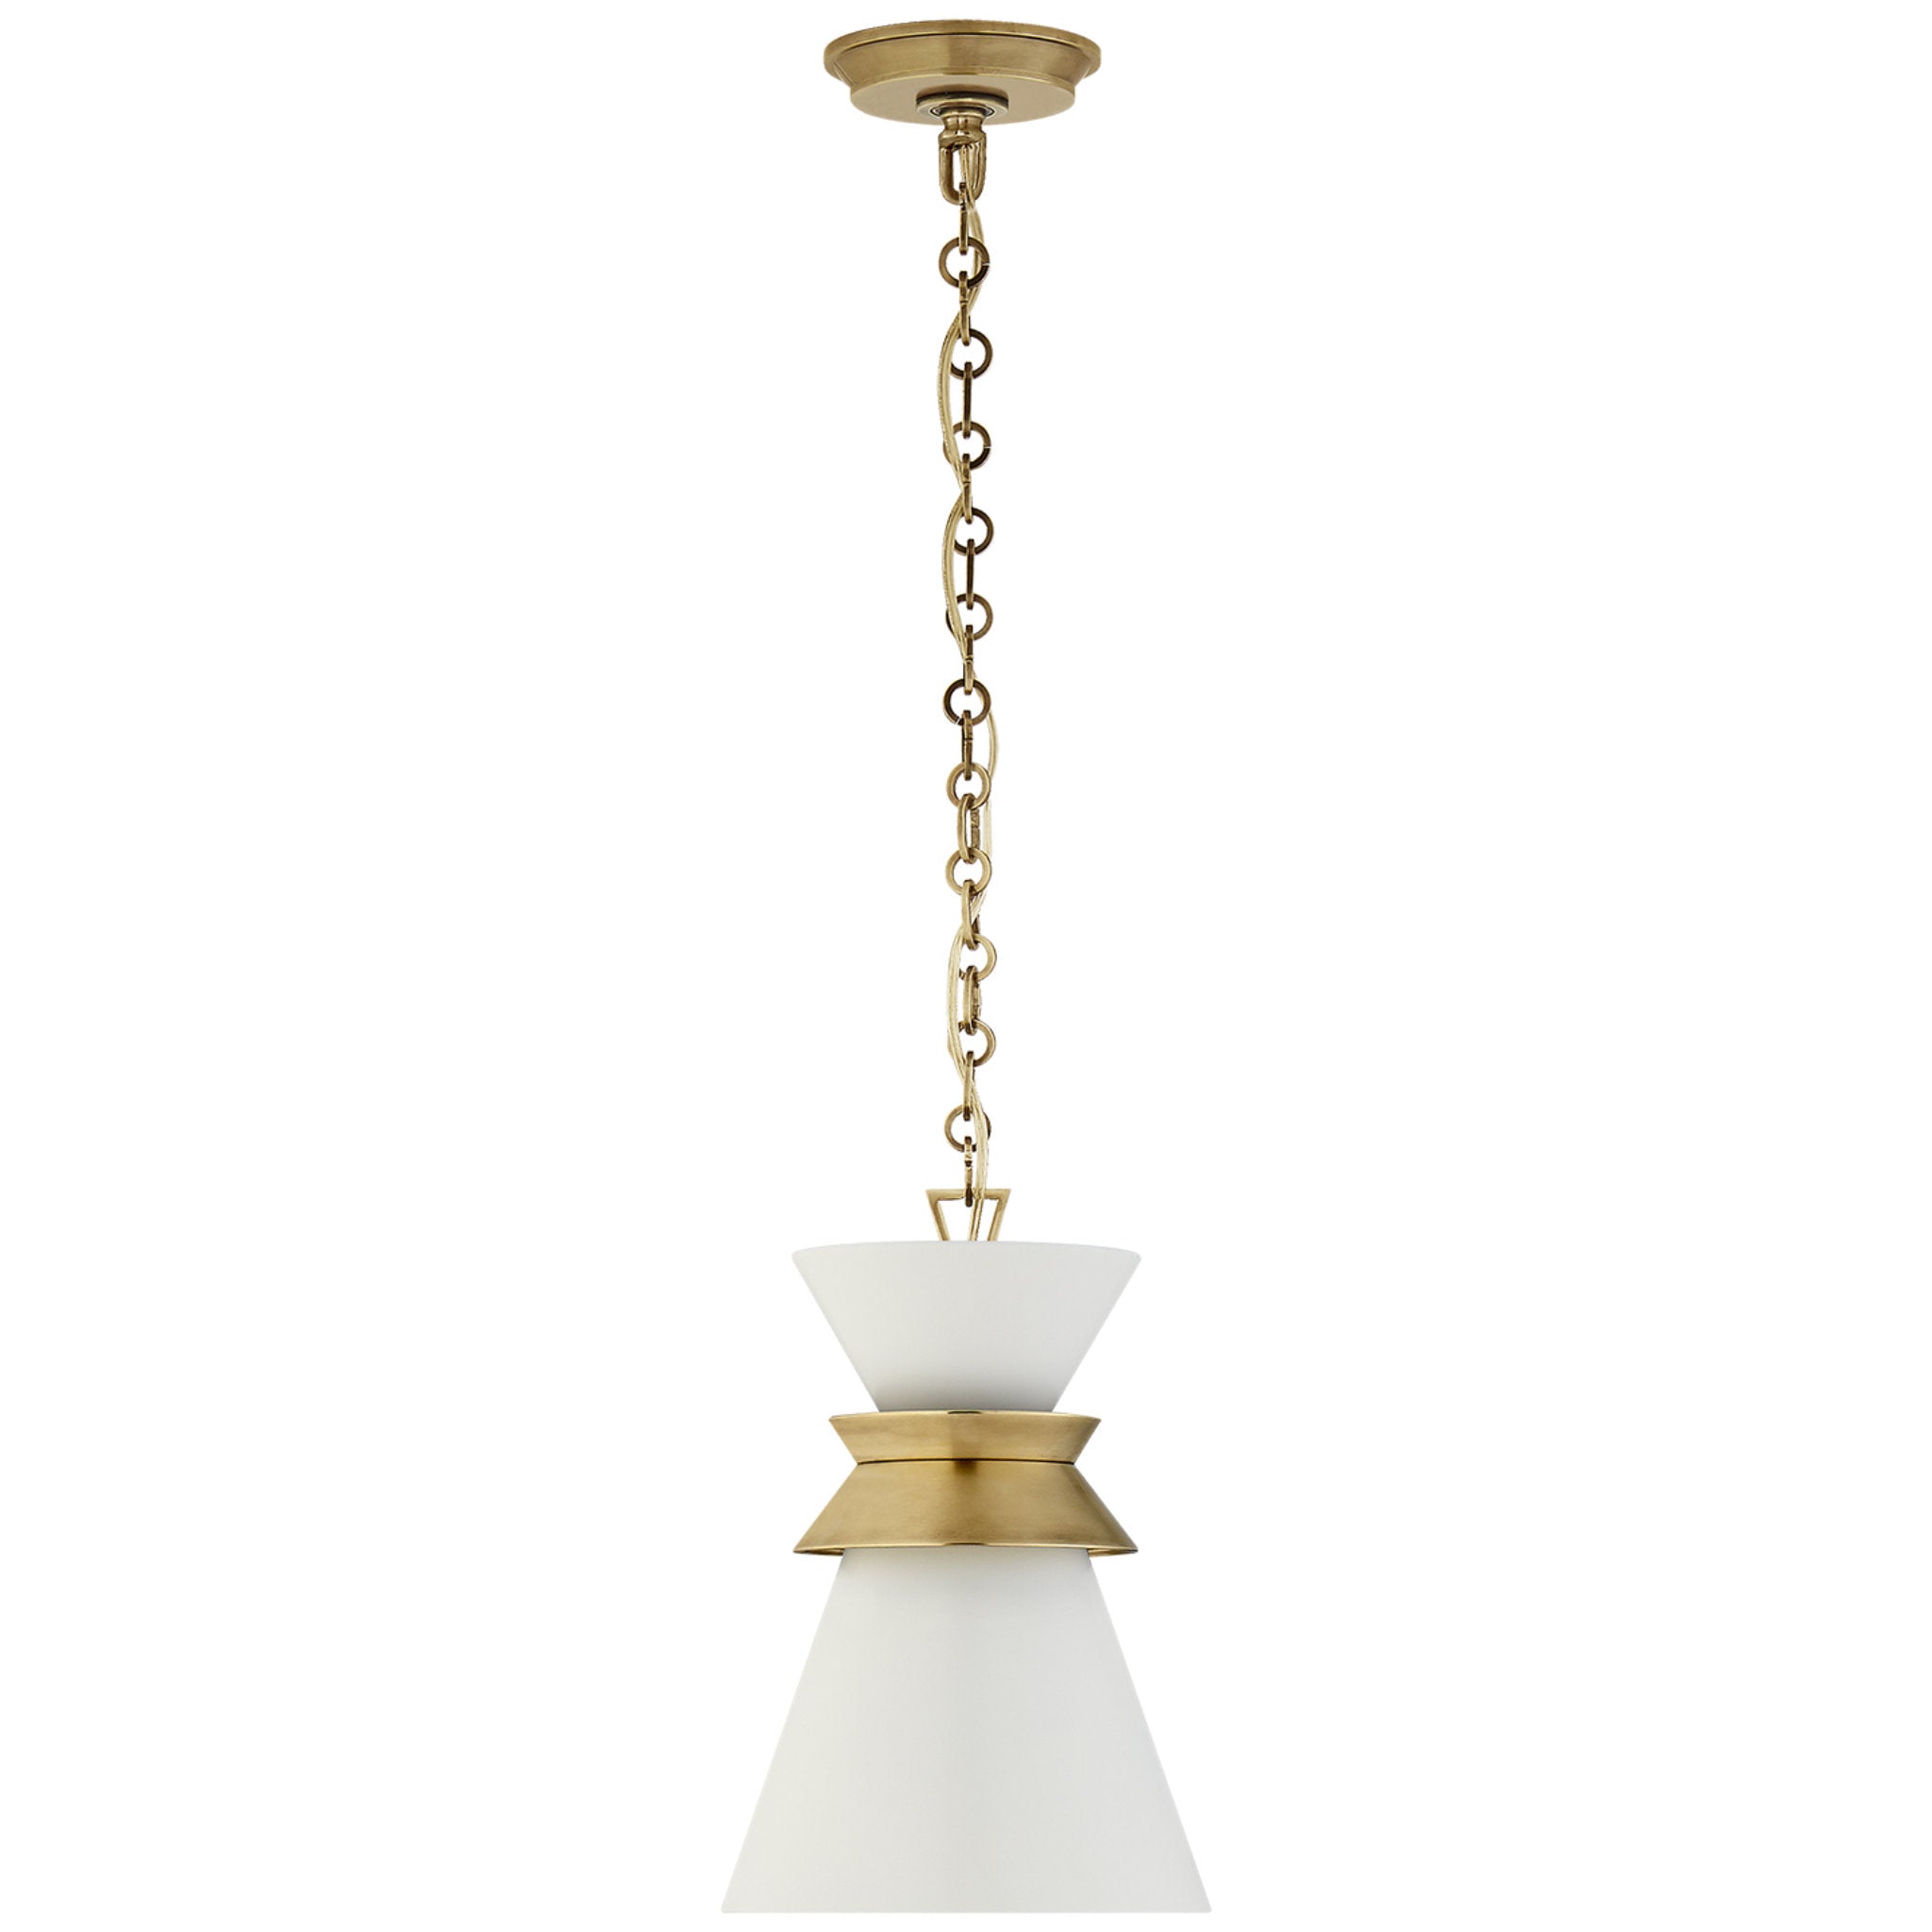 Chapman & Myers Alborg Small Stacked Pendant in Antique- Burnished Brass with Matte White Shade